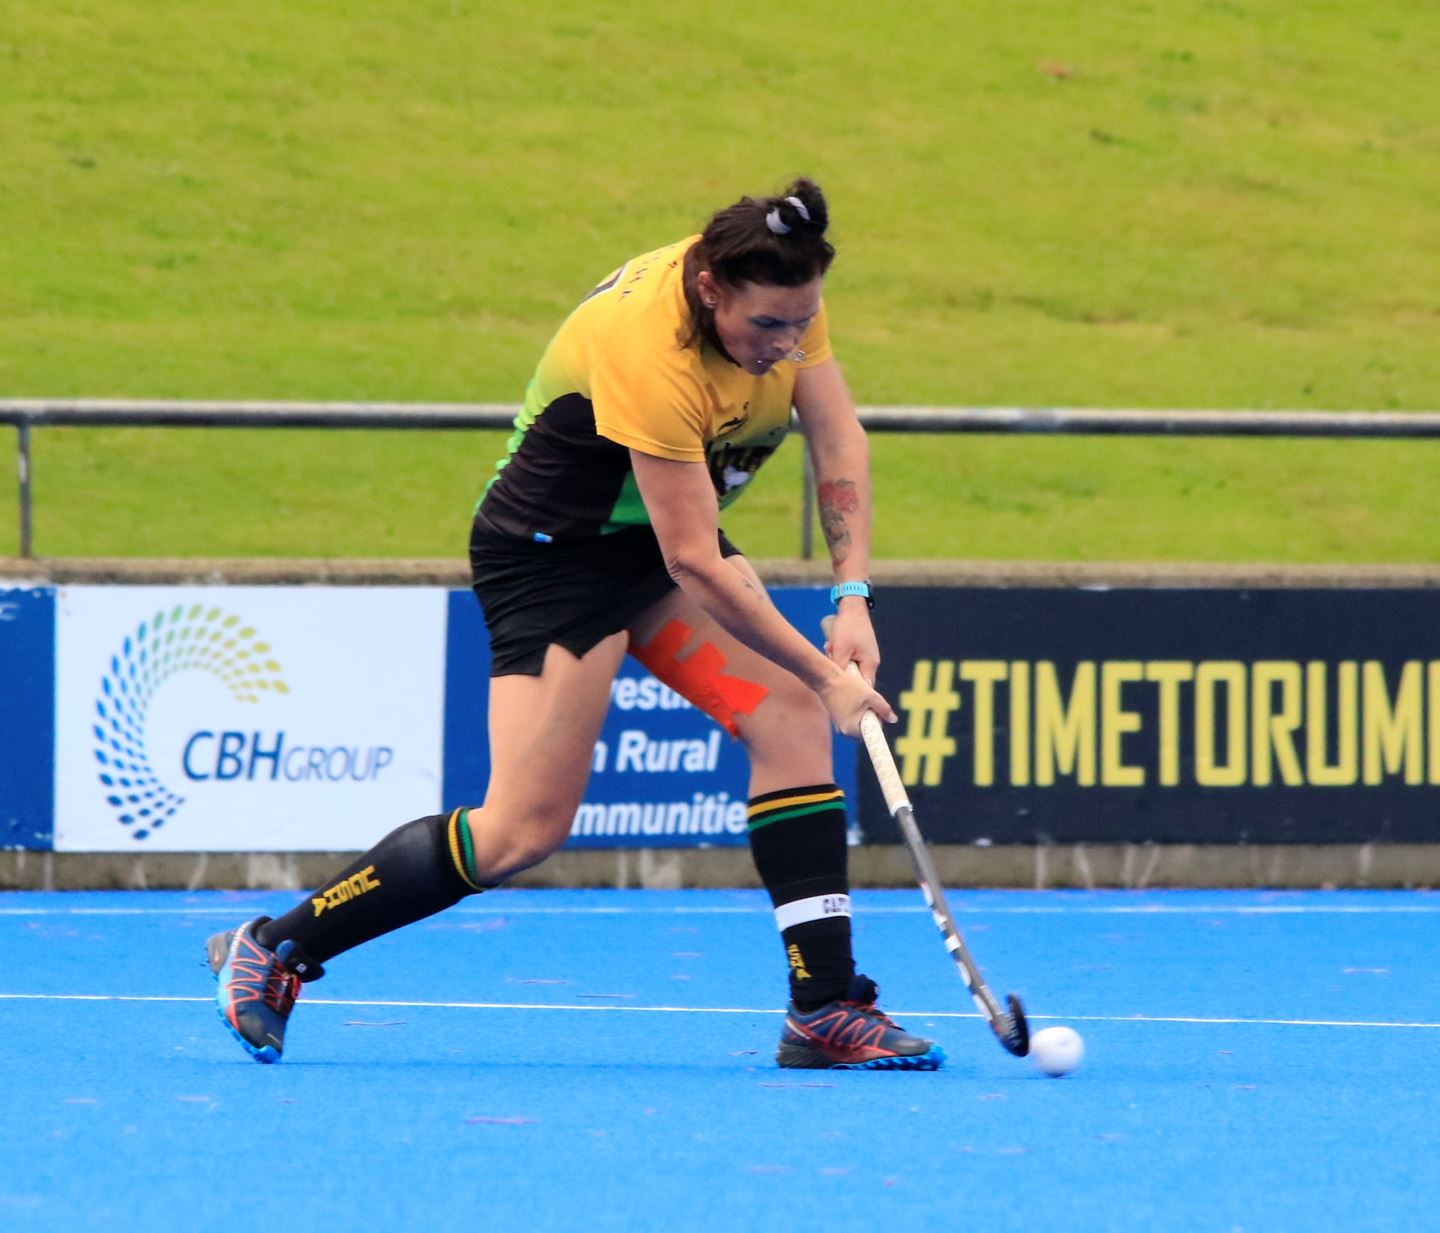 A girl wearing a yellow and green uniform swings a hockey stick